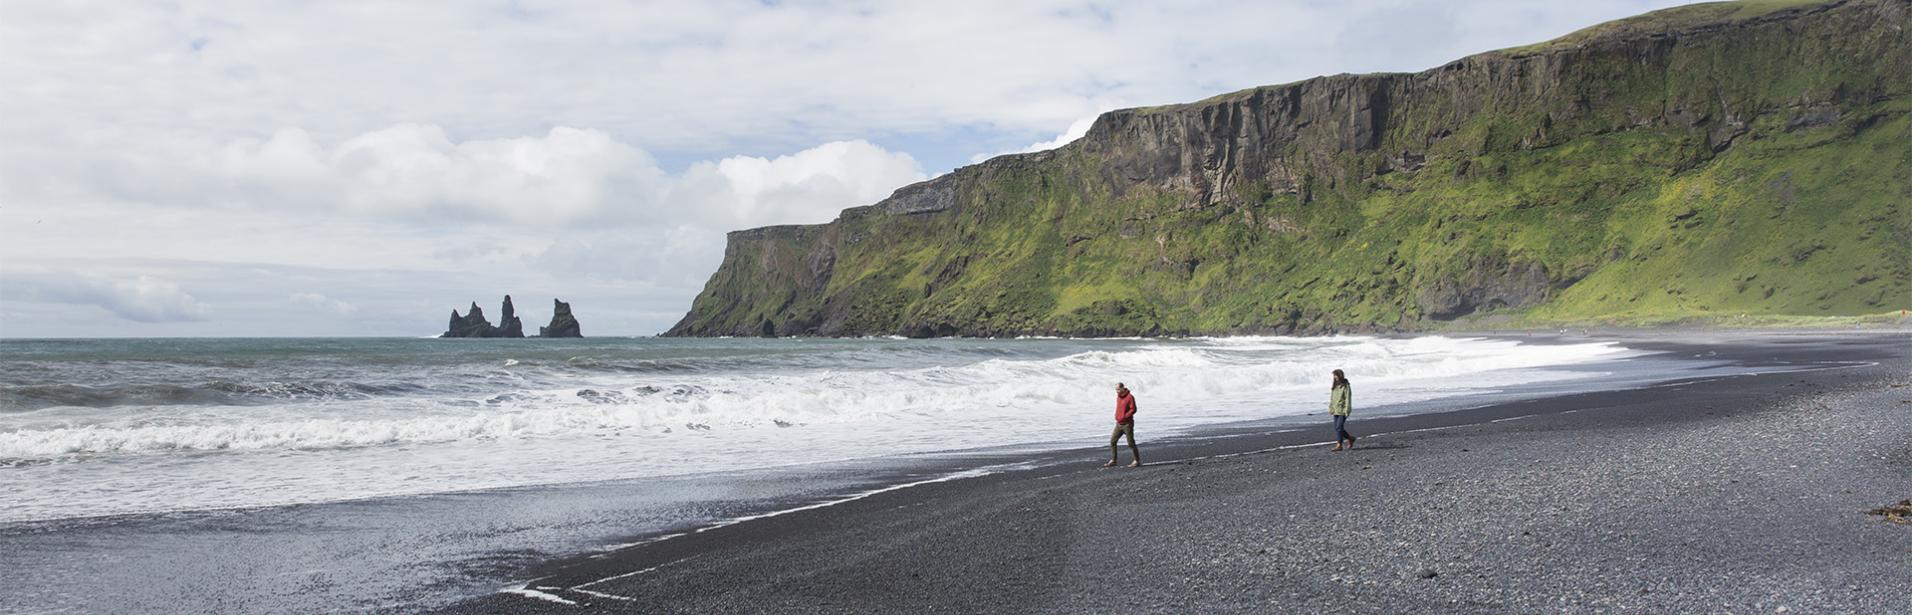 Escorted tour of Reykjavik and south coast of Iceland: couple strolling on the black beach Reynisfjara, south of Iceland.